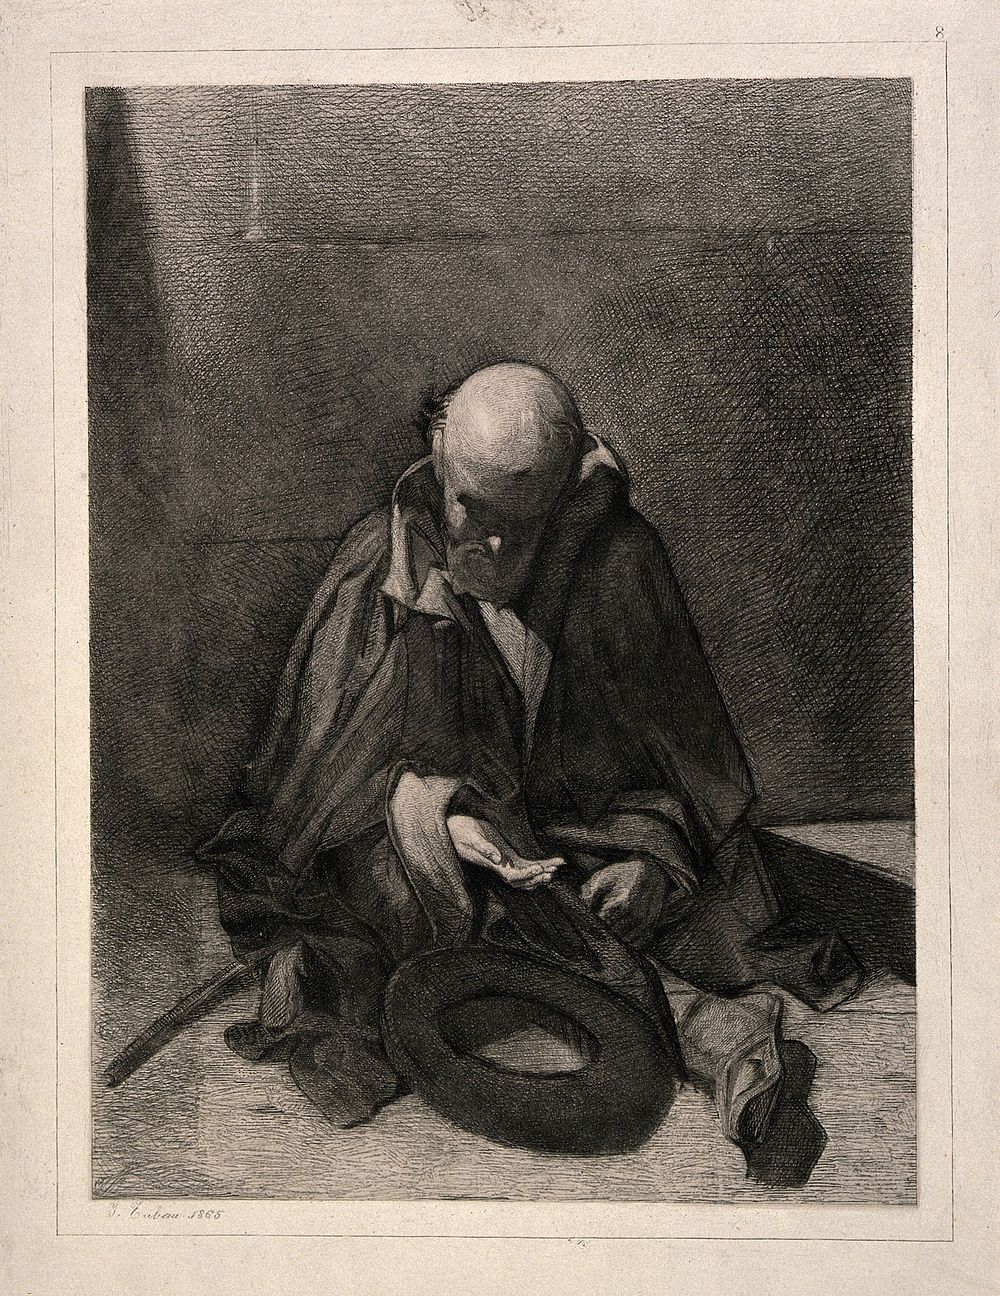 A blind beggar sits, head lowered, hand begging for money. Etching by J. Zubau, 1865.